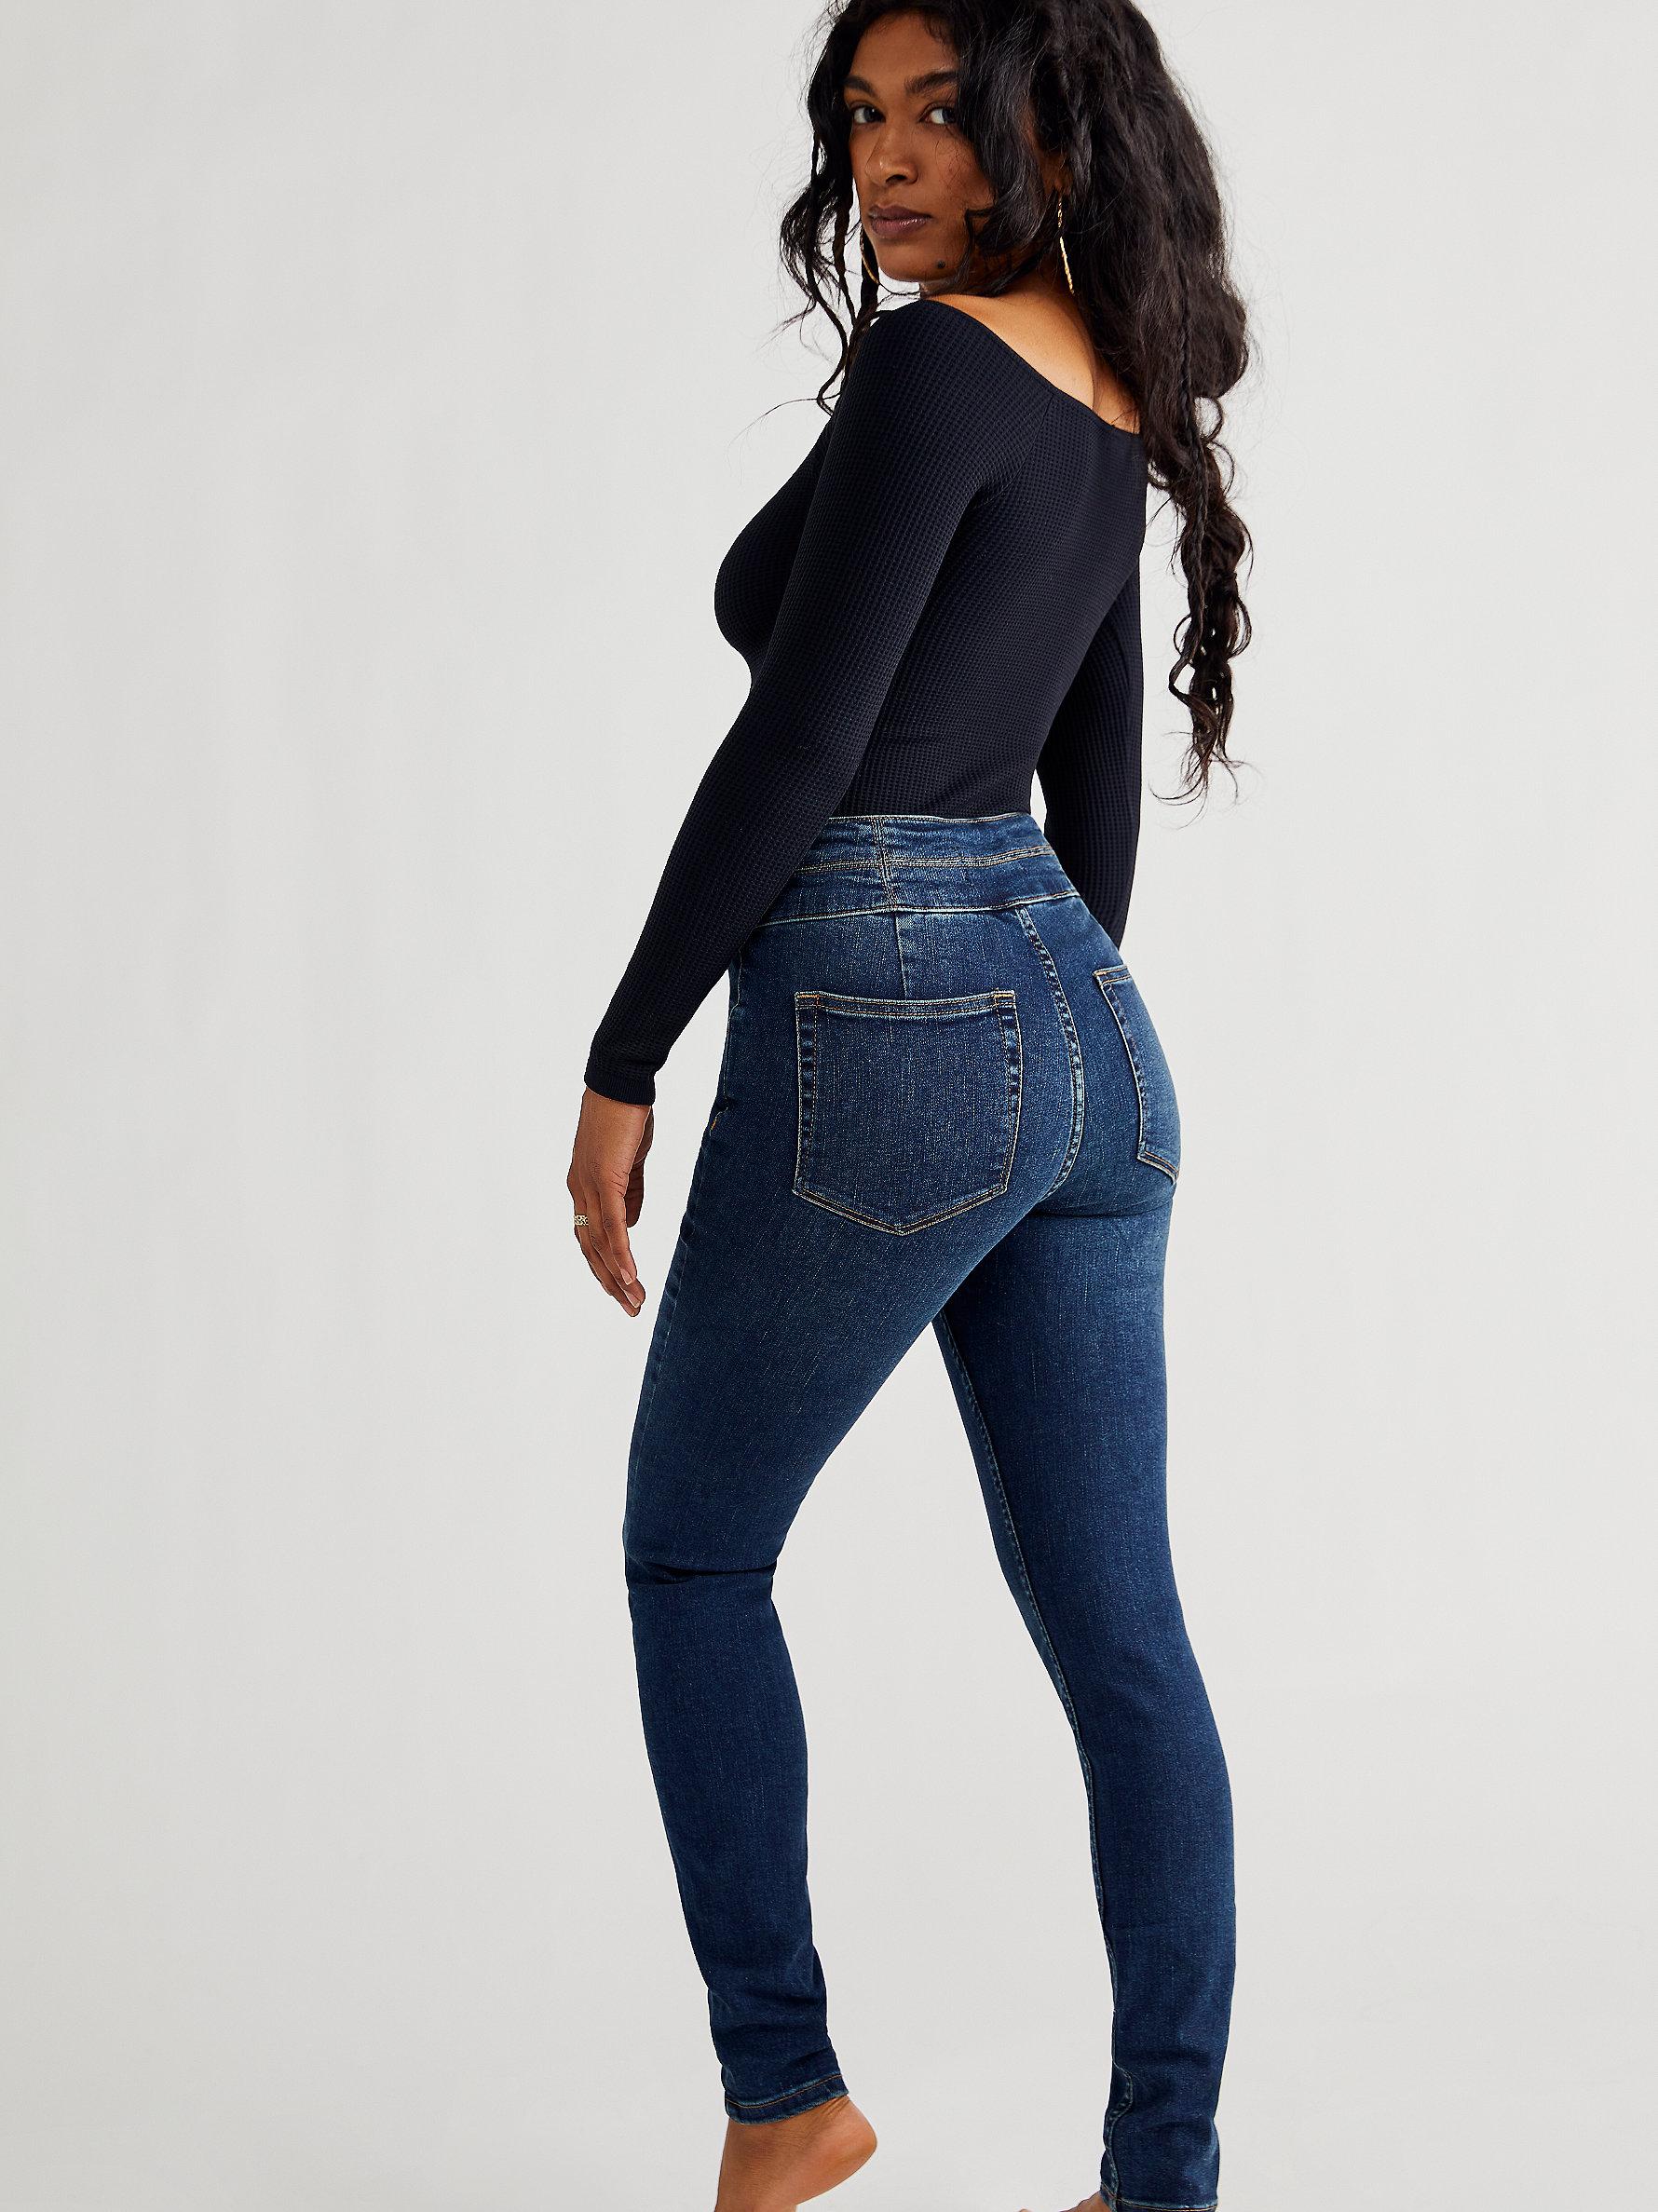 Free People Crvy High-rise Lace-up Skinny Jeans in Blue | Lyst